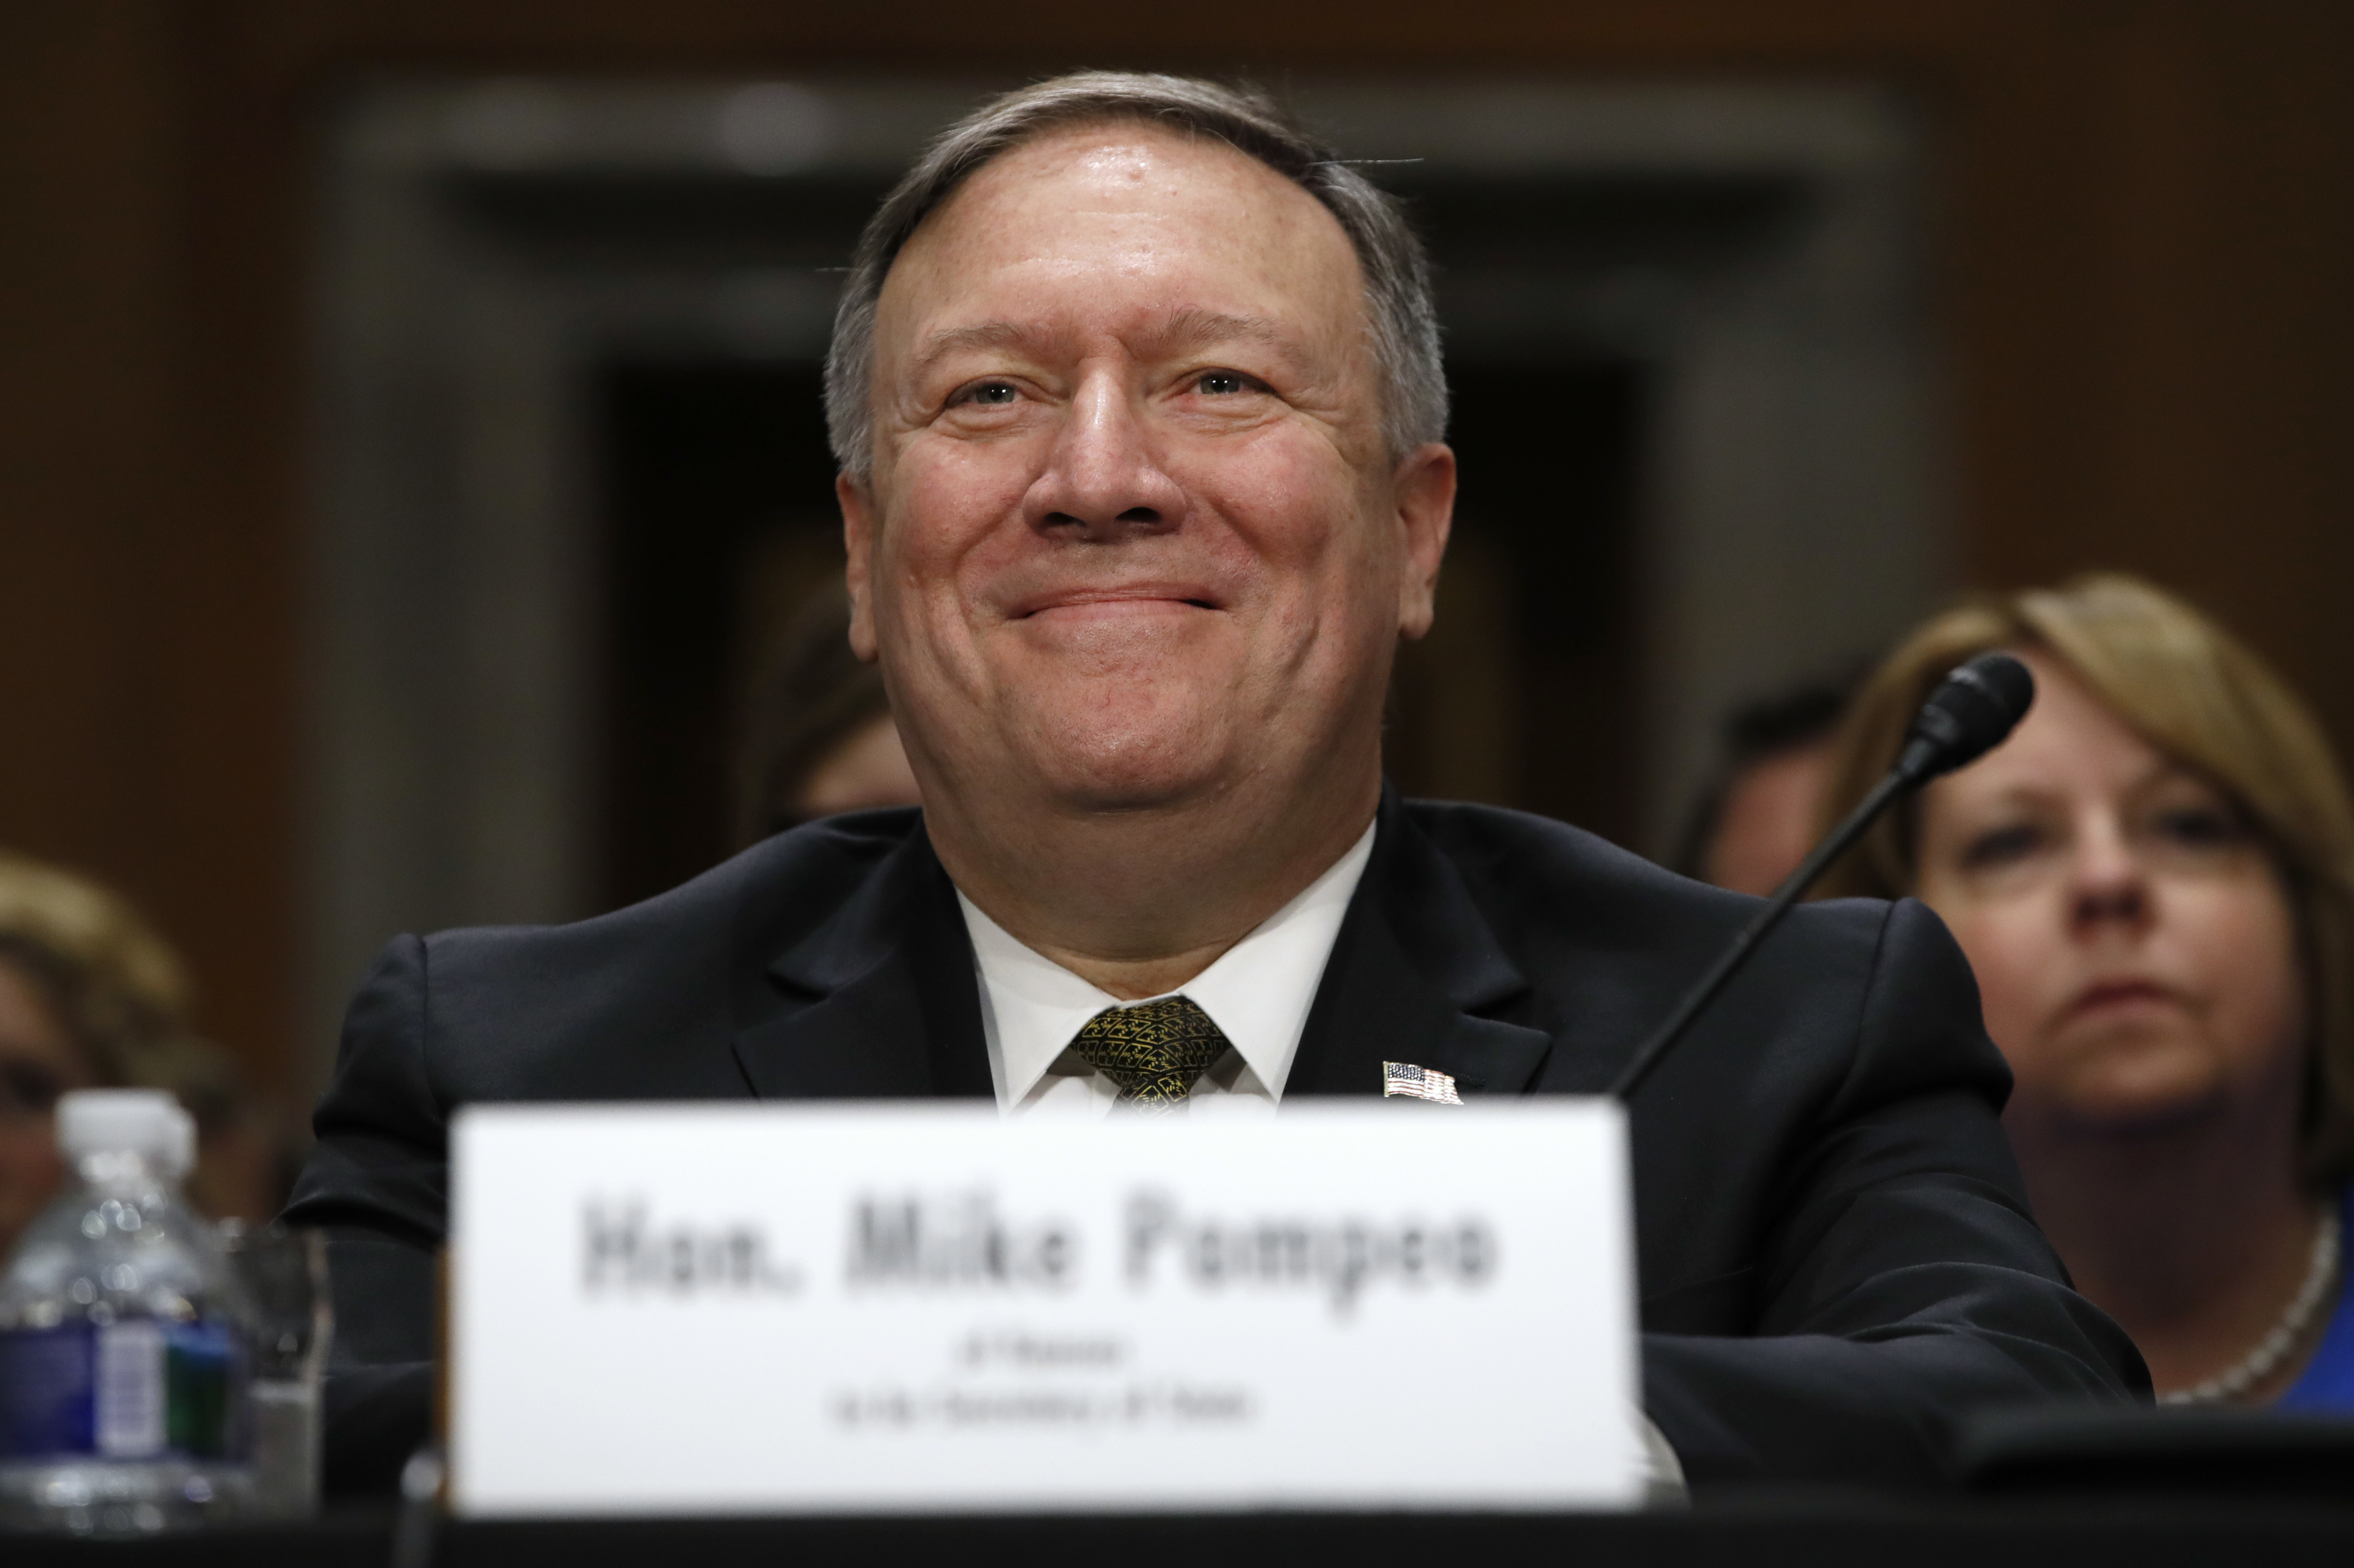 Secretary of State-designate Mike Pompeo smiles after his introduction before the Senate Foreign Relations Committee during a confirmation hearing on April 12 on Capitol Hill.